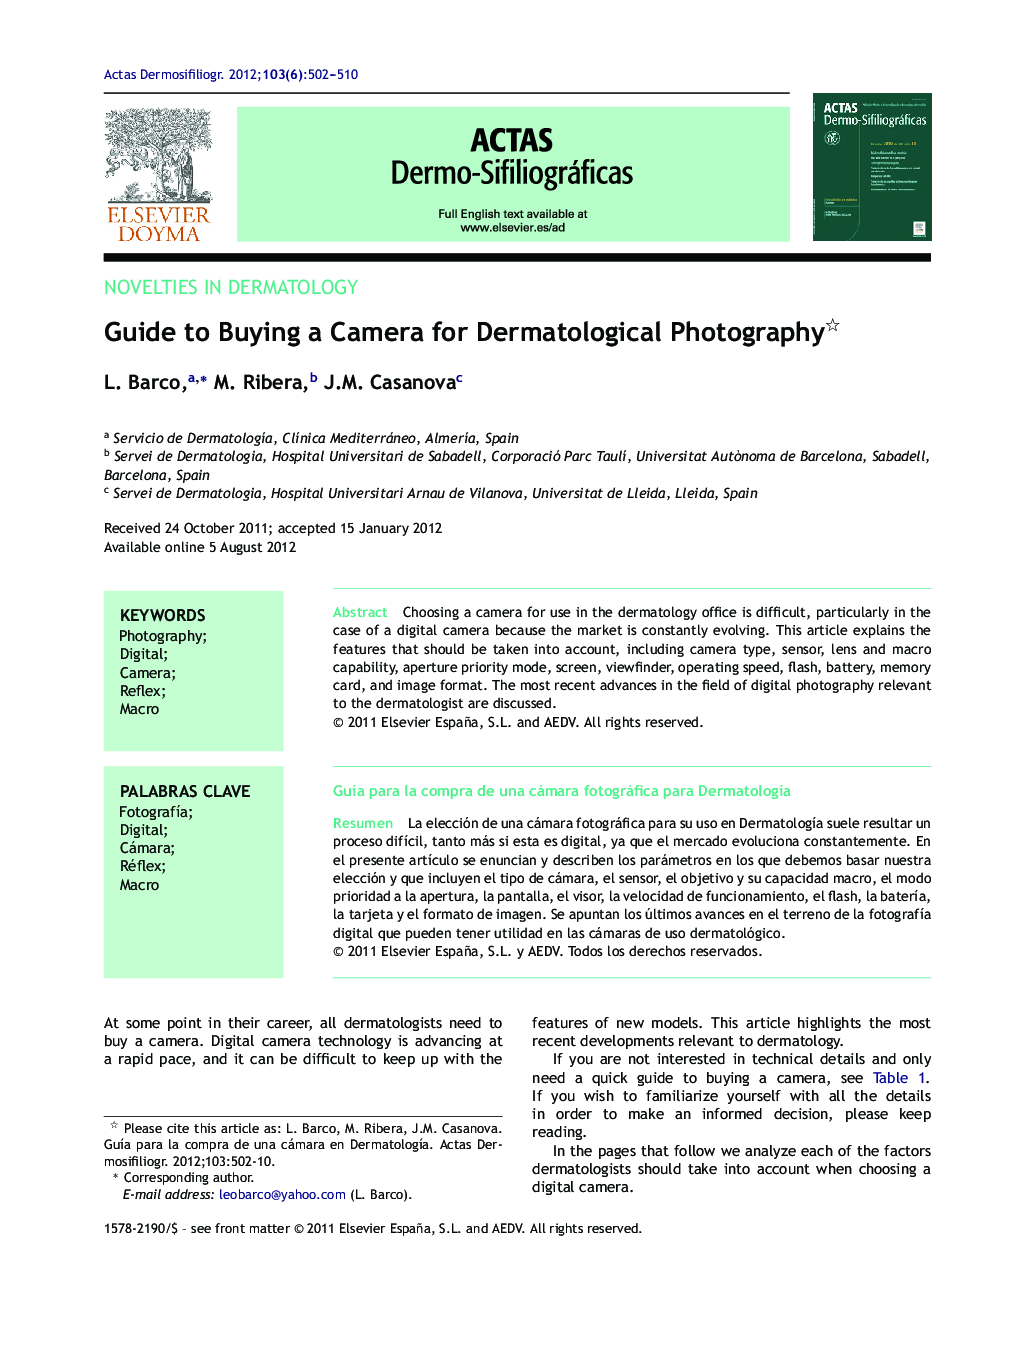 Guide to Buying a Camera for Dermatological Photography 